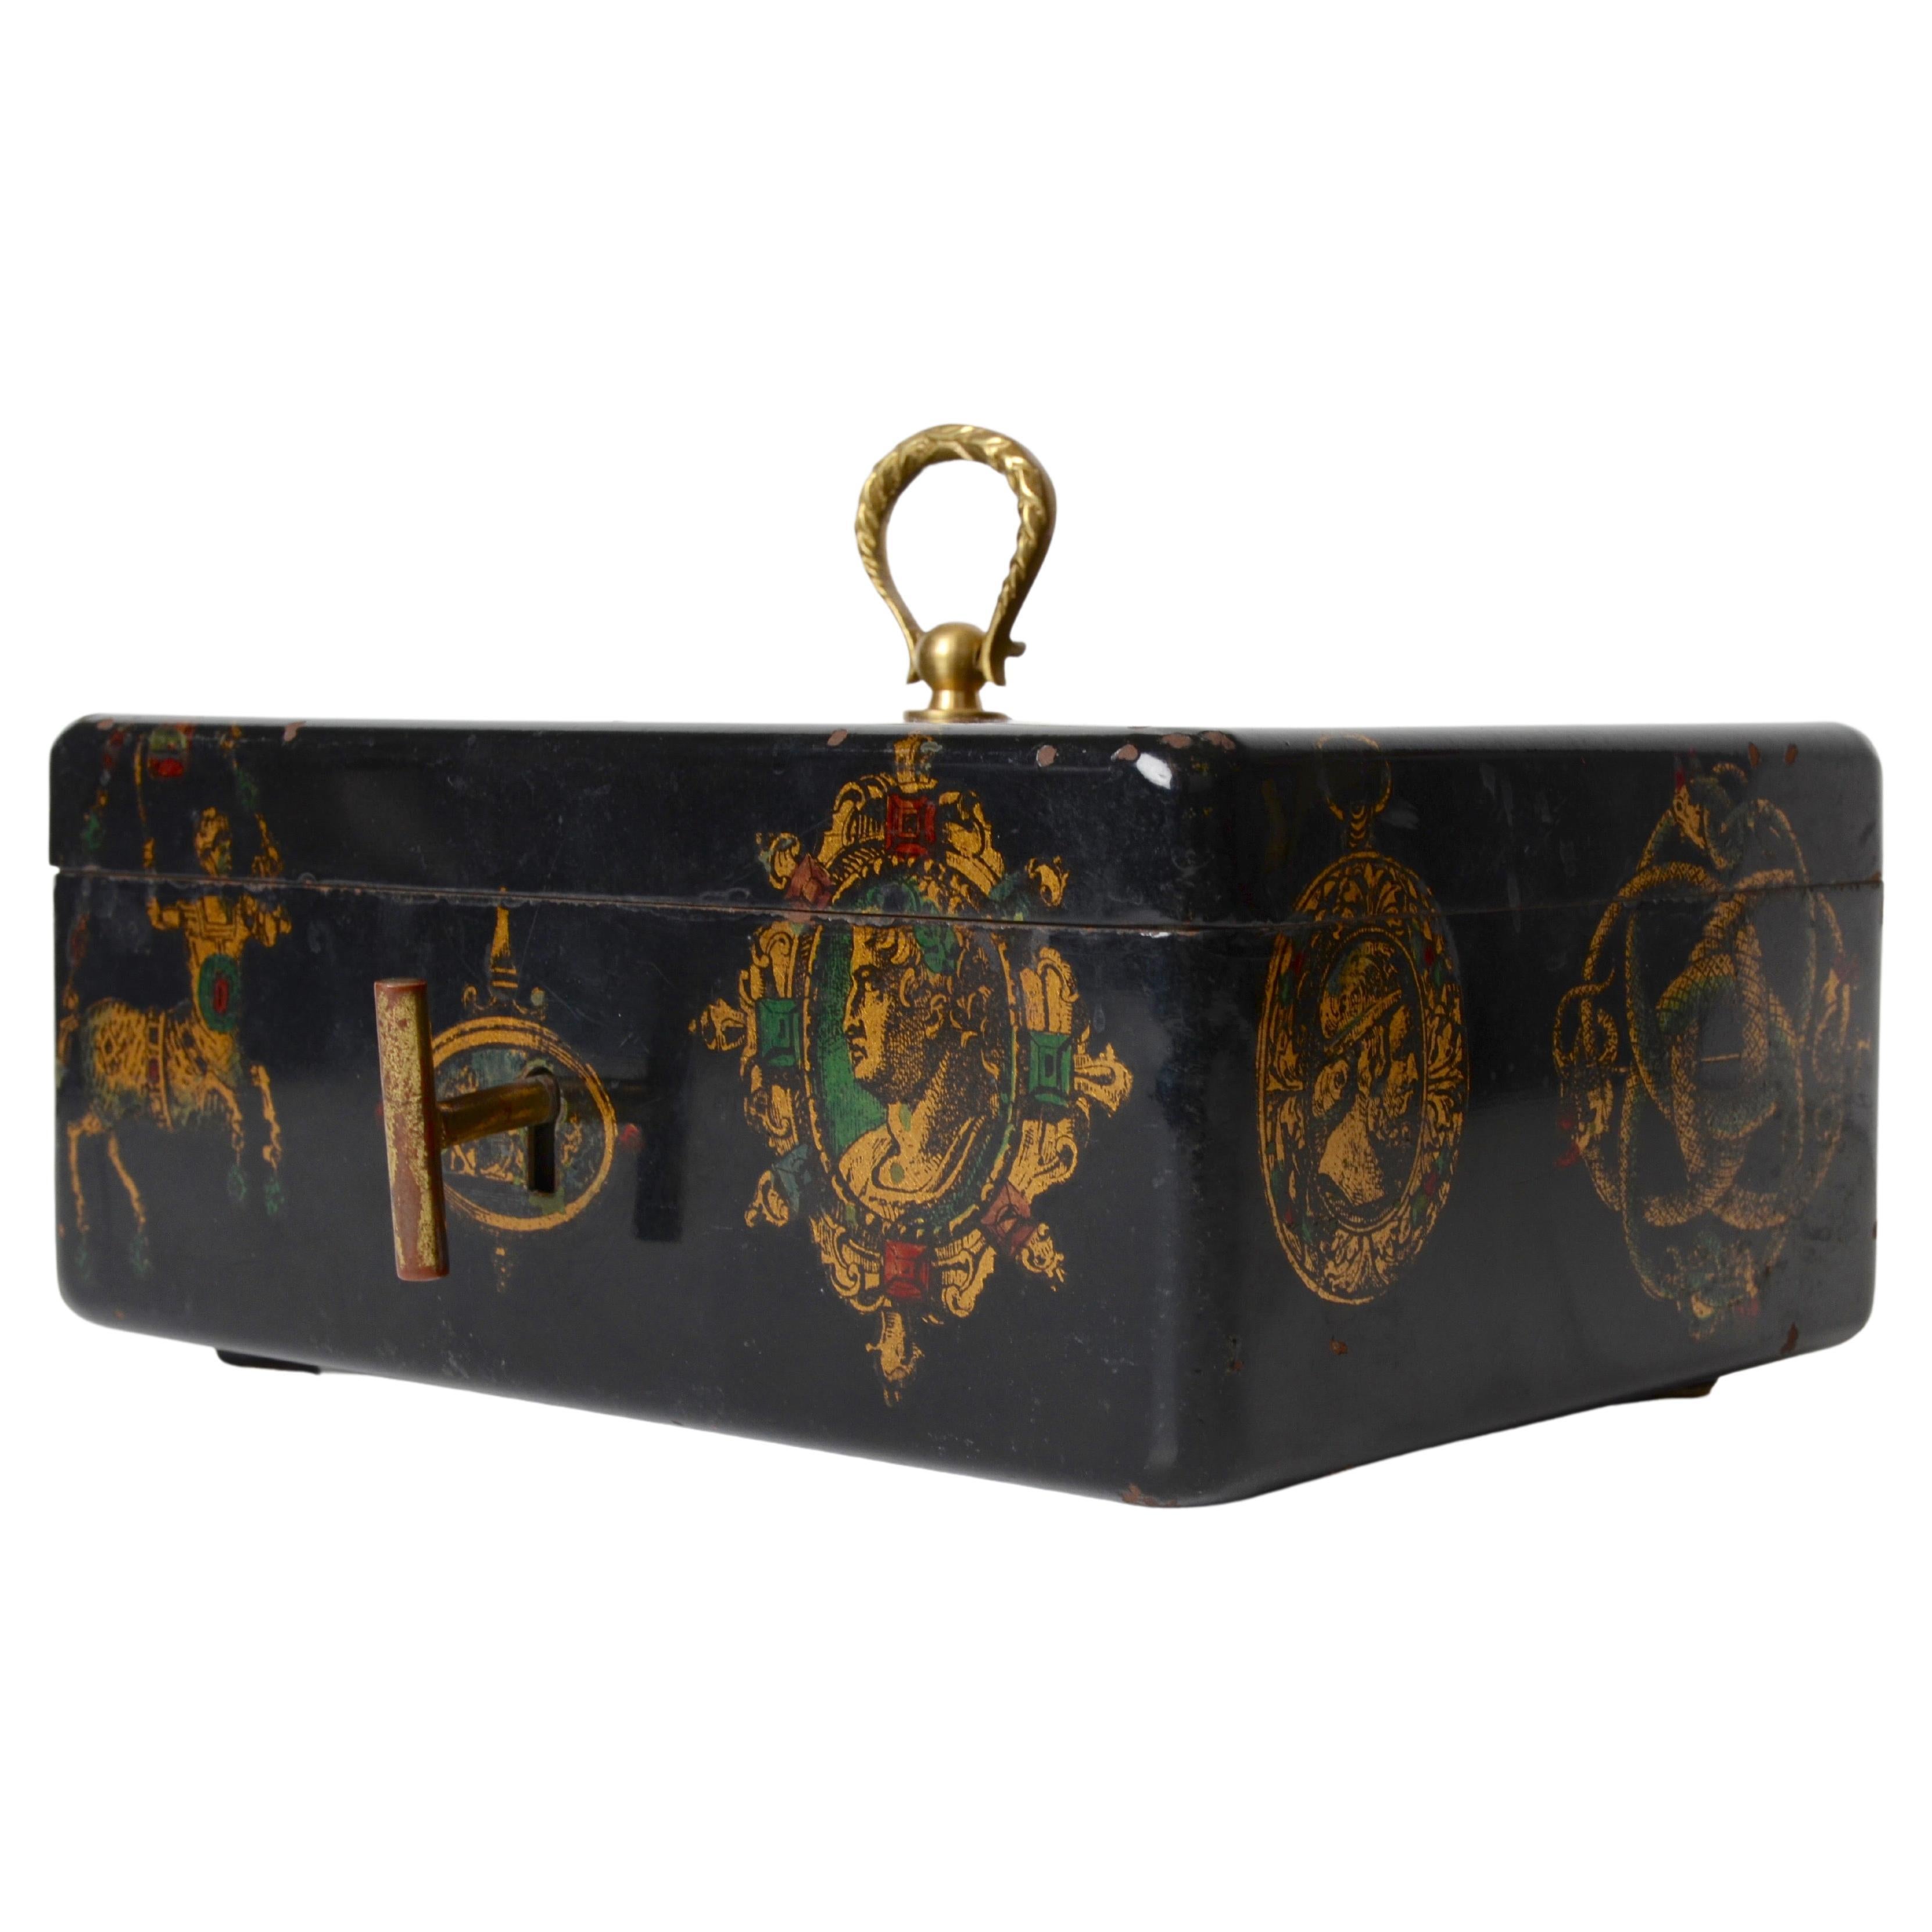 Jewelry box by Fornasetti, mid-1900s